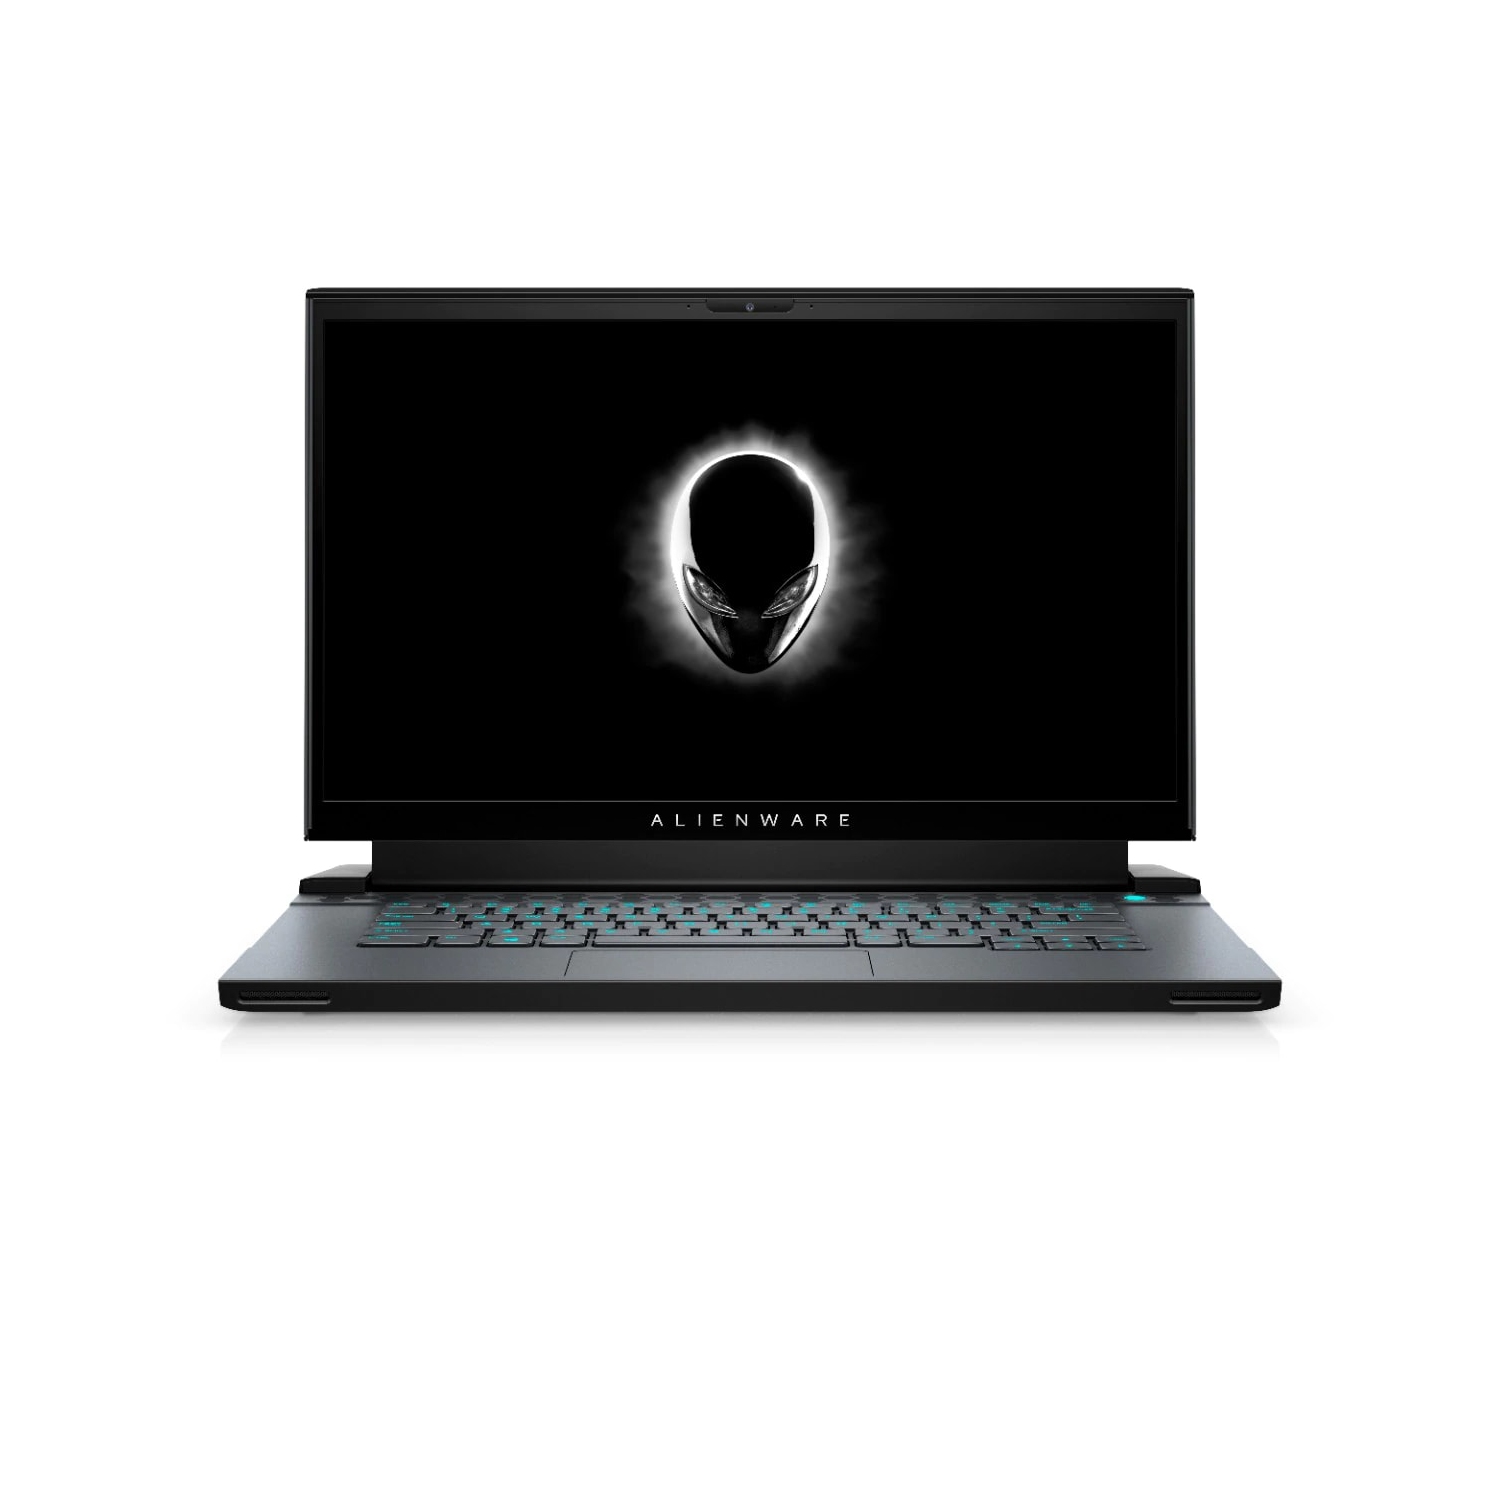 Refurbished (Excellent) - Dell Alienware m15 R4 Gaming Laptop (2021), 15.6" FHD, Core i7, 256GB SSD, 32GB RAM, RTX 3080, 8 Cores @ 5 GHz, 10th Gen CPU Certified